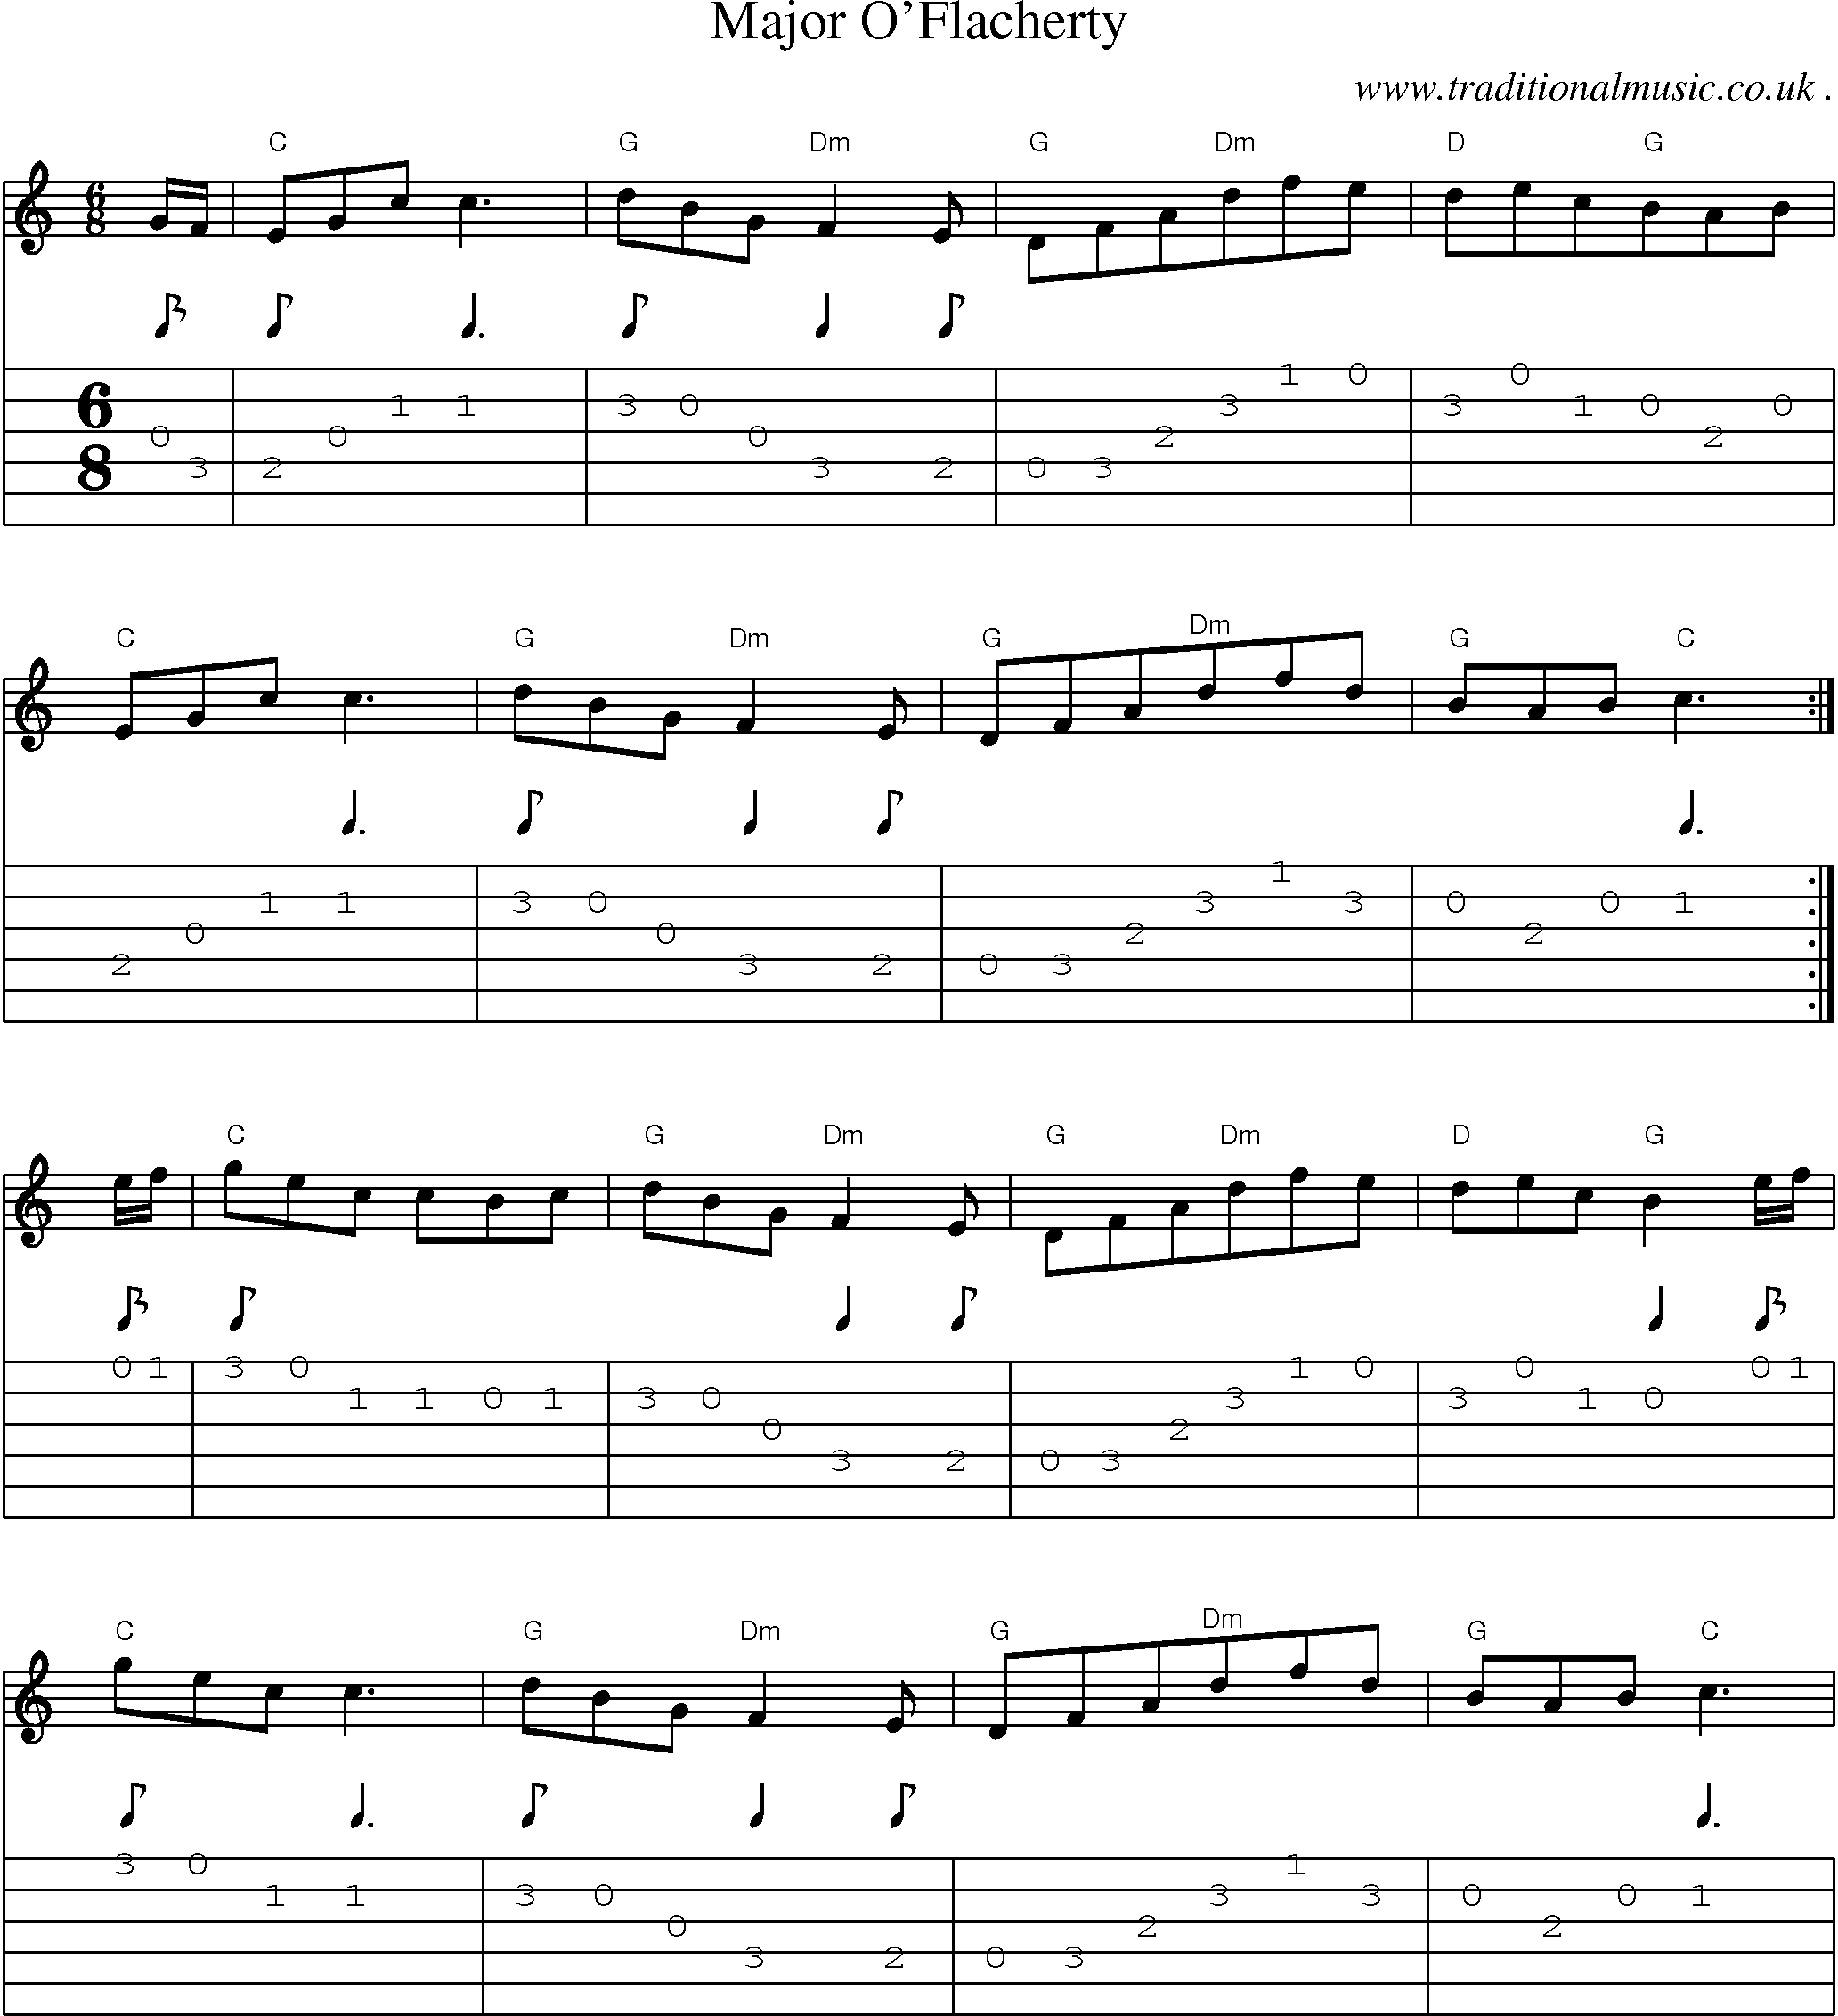 Sheet-Music and Guitar Tabs for Major Oflacherty